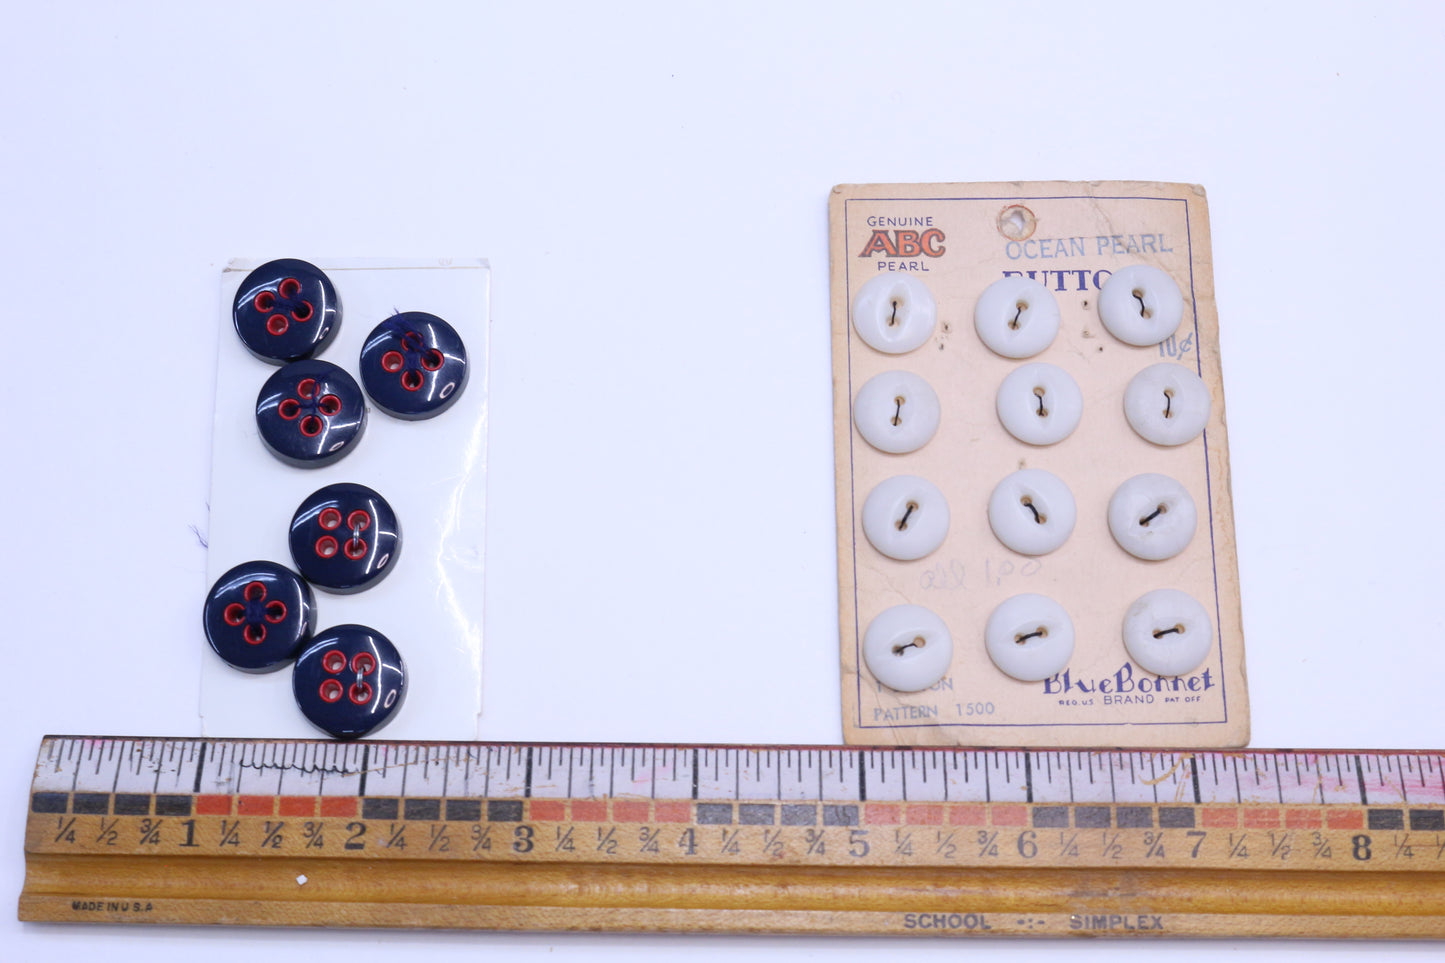 Vintage Blue Buttons with Red or Vintage Pearl Buttons